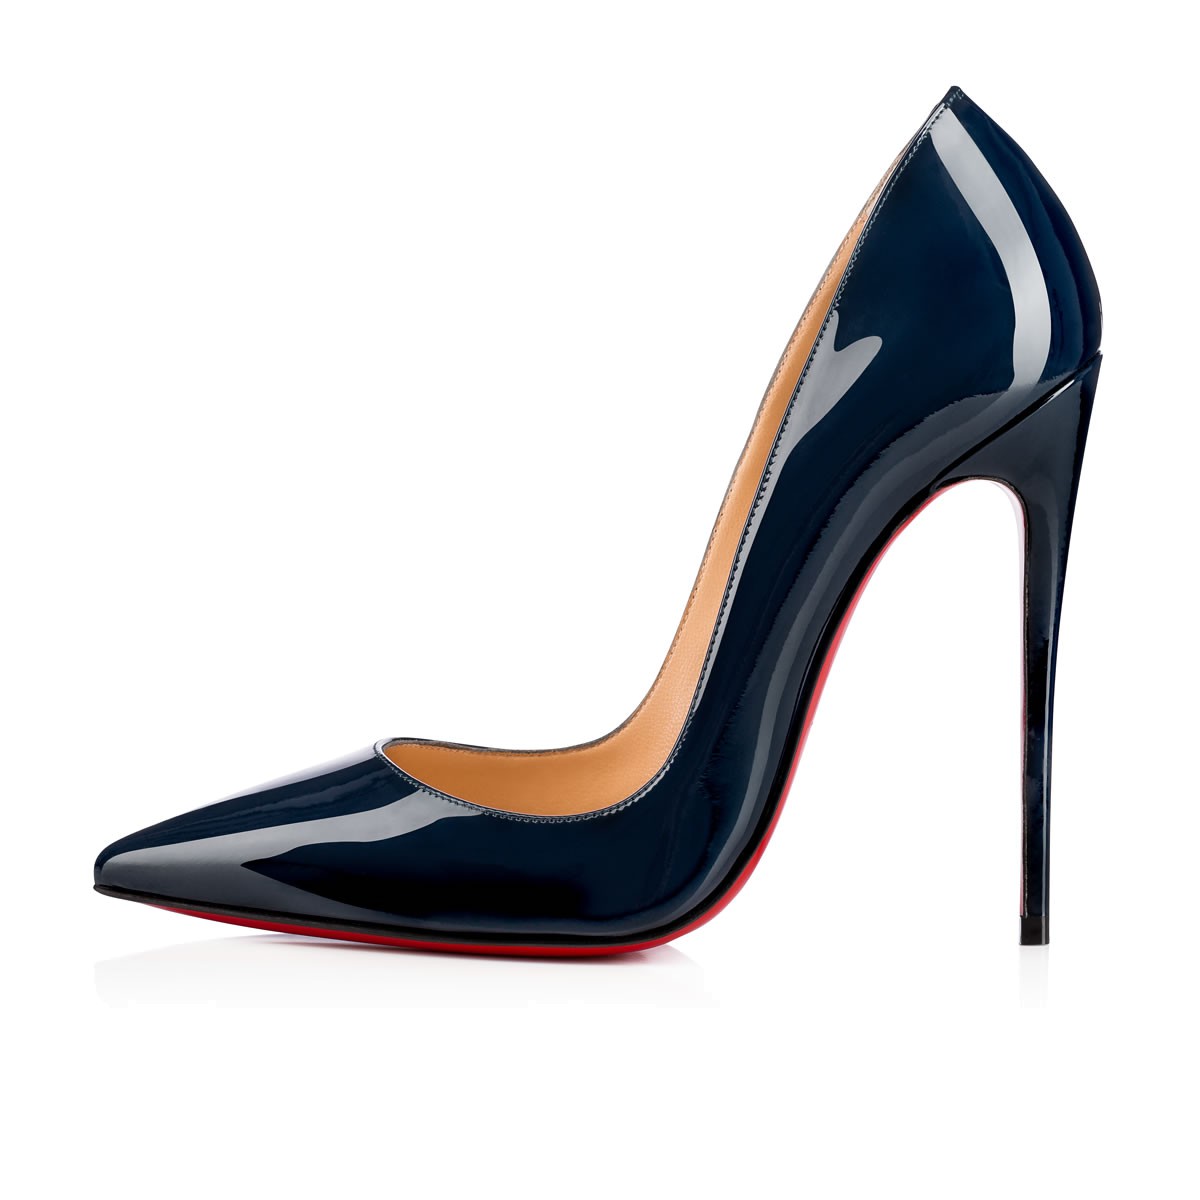 3D model Christian Louboutin So Kate 120mm High Heels VR / AR / low-poly